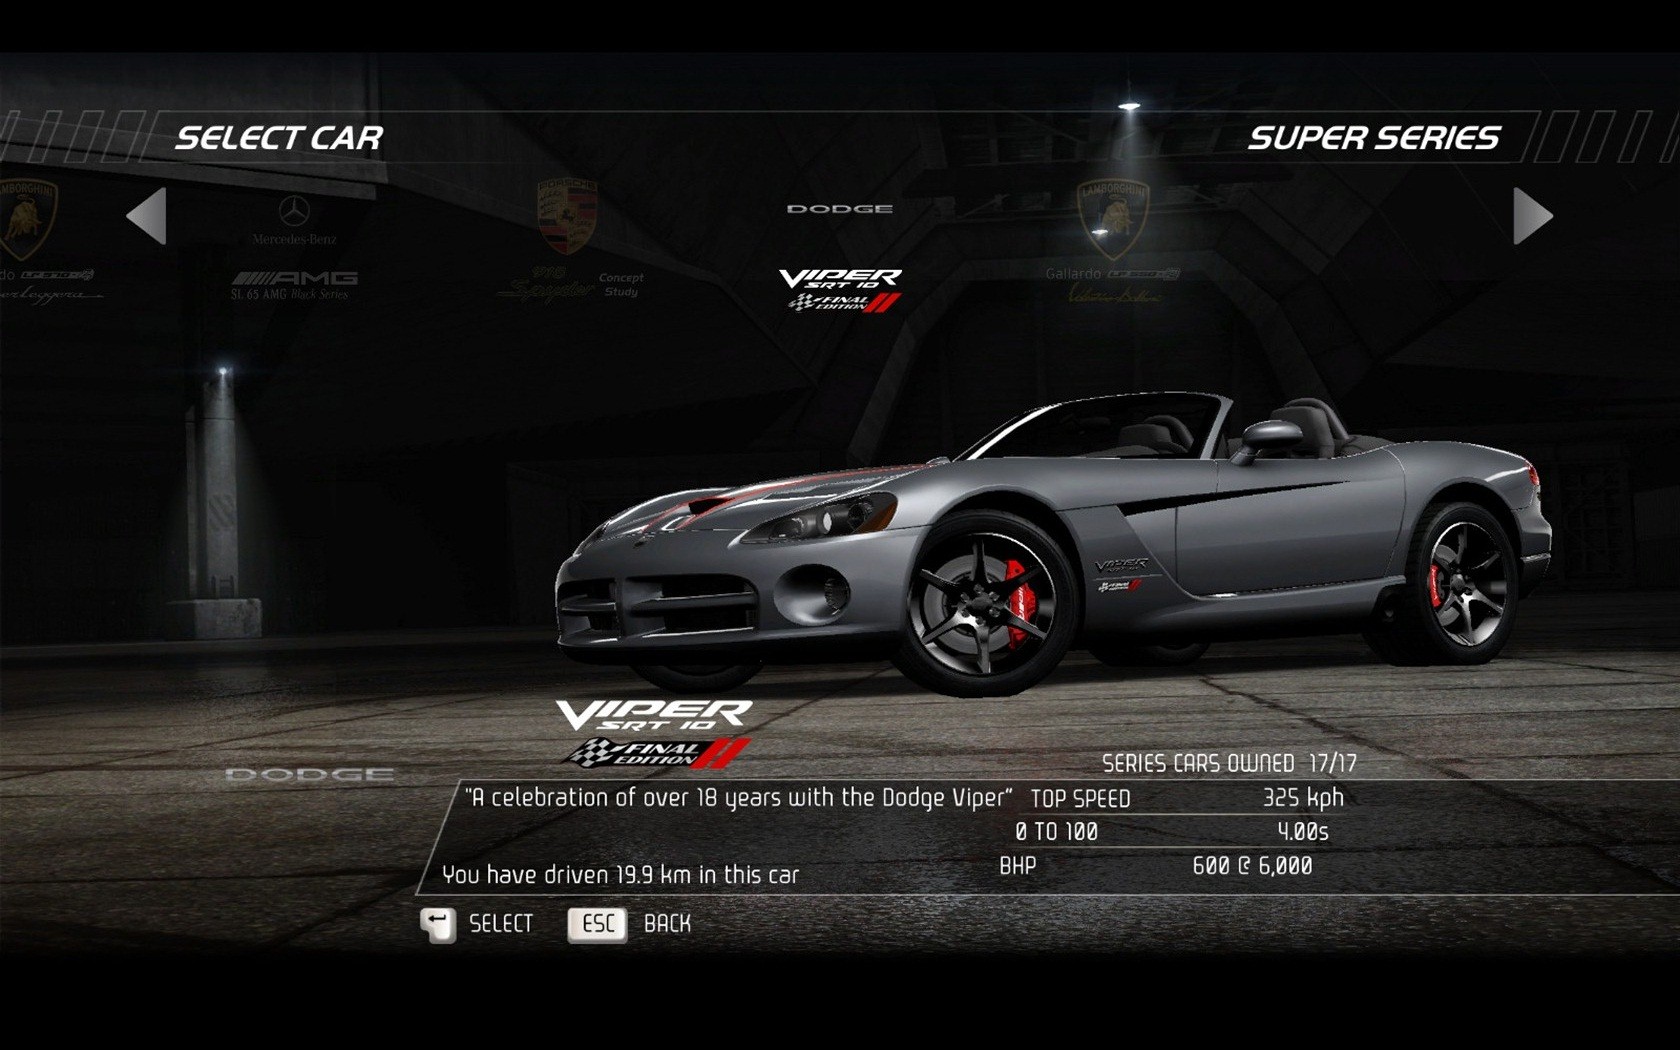 video, Games, Cars, Dodge, Viper, Need, For, Speed, Hot, Pursuit, Srt10, Pc, Games Wallpaper